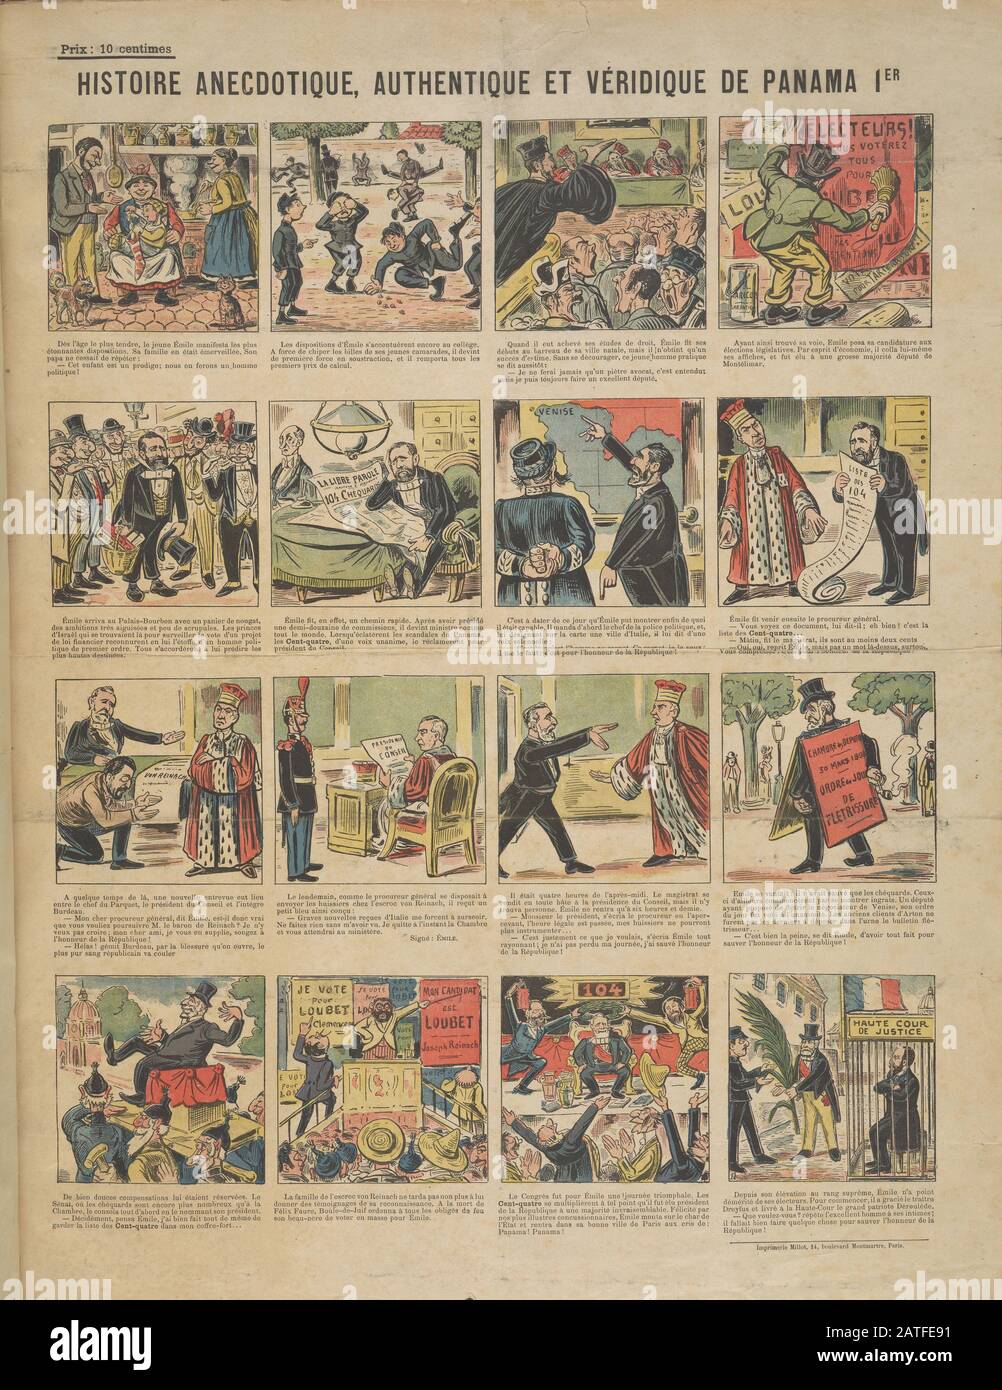 Histoire Anecdotique Authentique et Véridique de Panama - 1900 - Series of cartoons relating to the Panama scandals of 1892-1893 which sparked a wave of anti-Semitism in France that paved the way for the Dreyfus Affair. Hand colored. Stock Photo